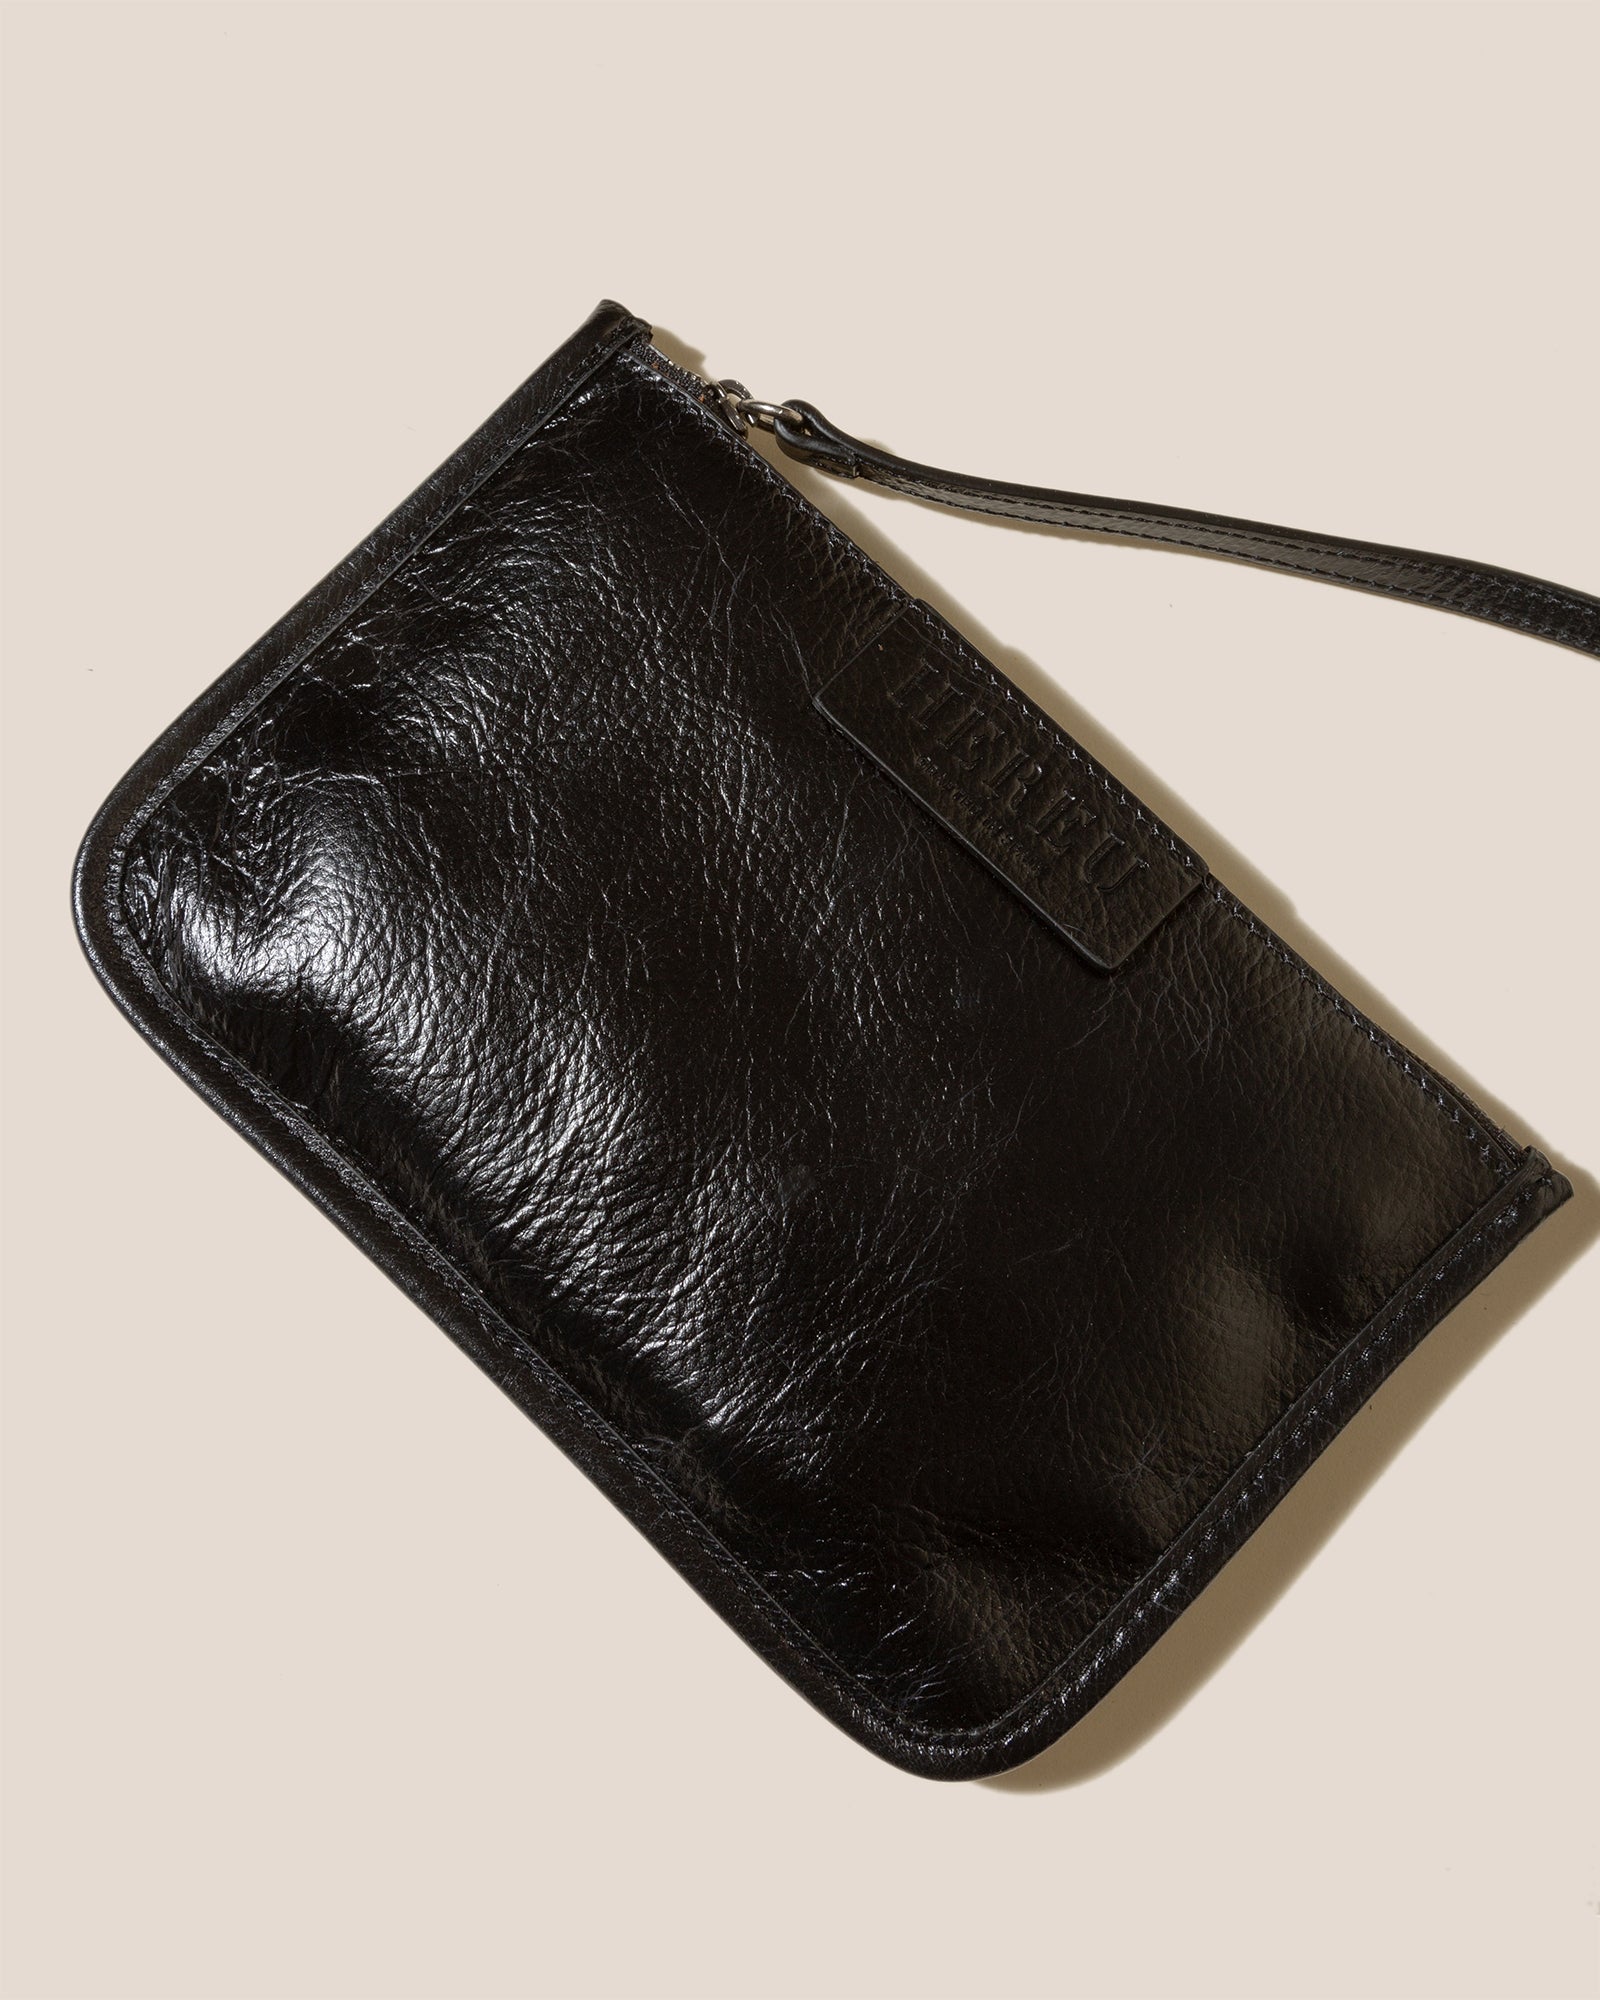 Wholesale RFID SECURITY LINING. Quality Full Grain Cow Hide Leather Purse.  Style No: 21004 - hide & chic - Fieldfolio